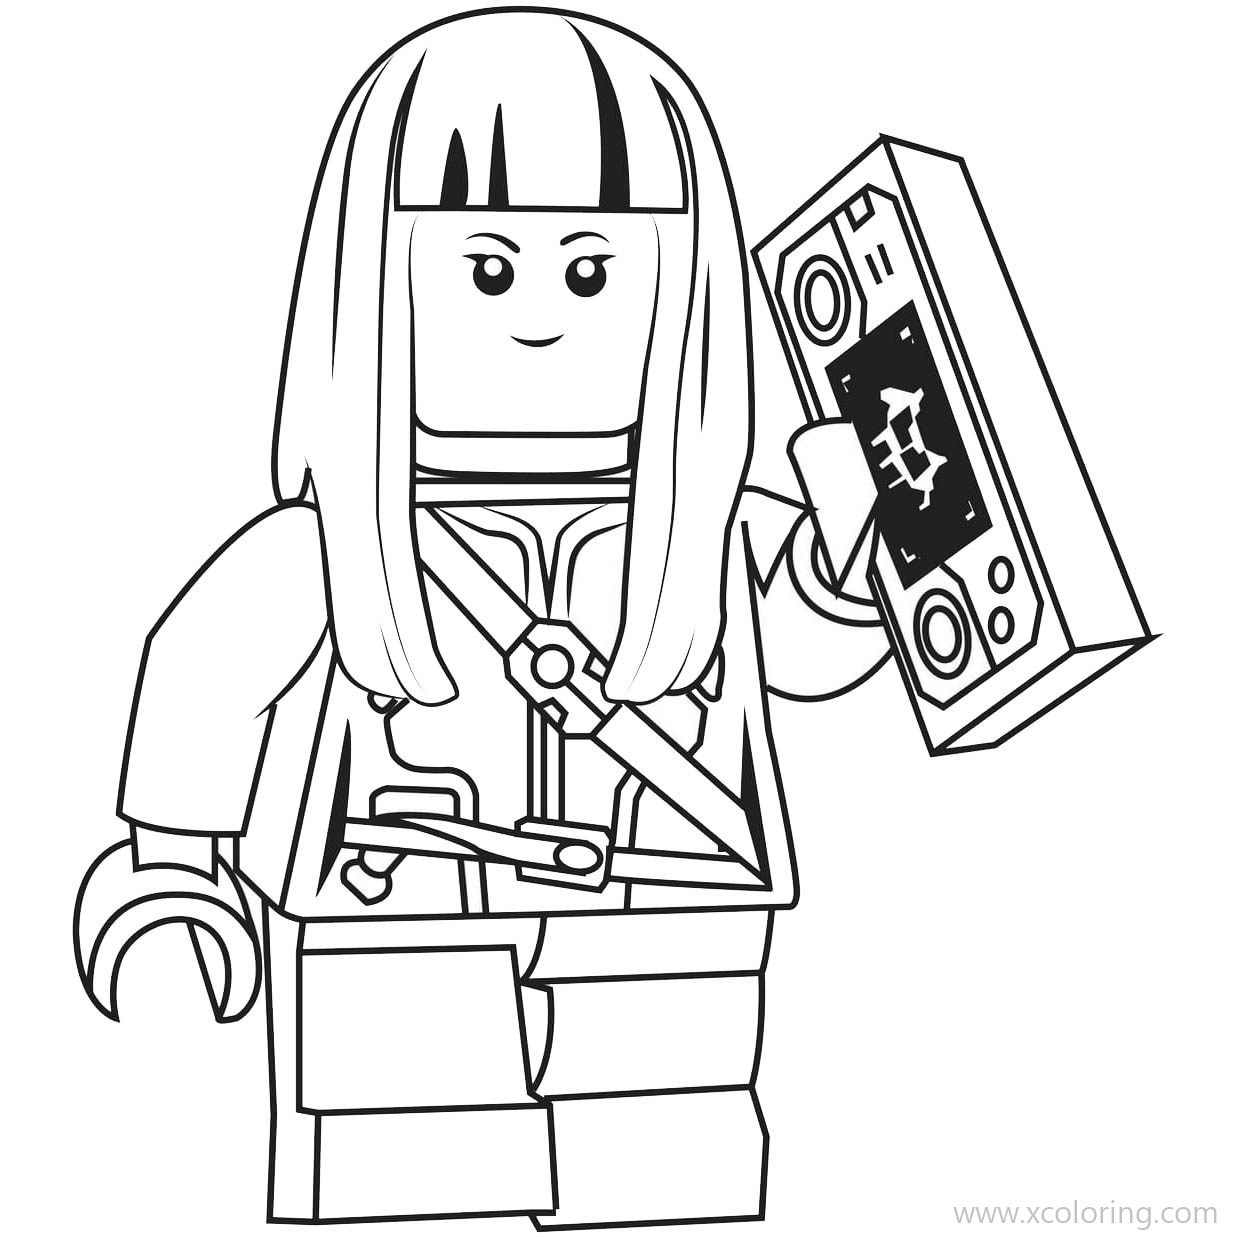 Free Ava from LEGO NEXO Knights Coloring Pages printable